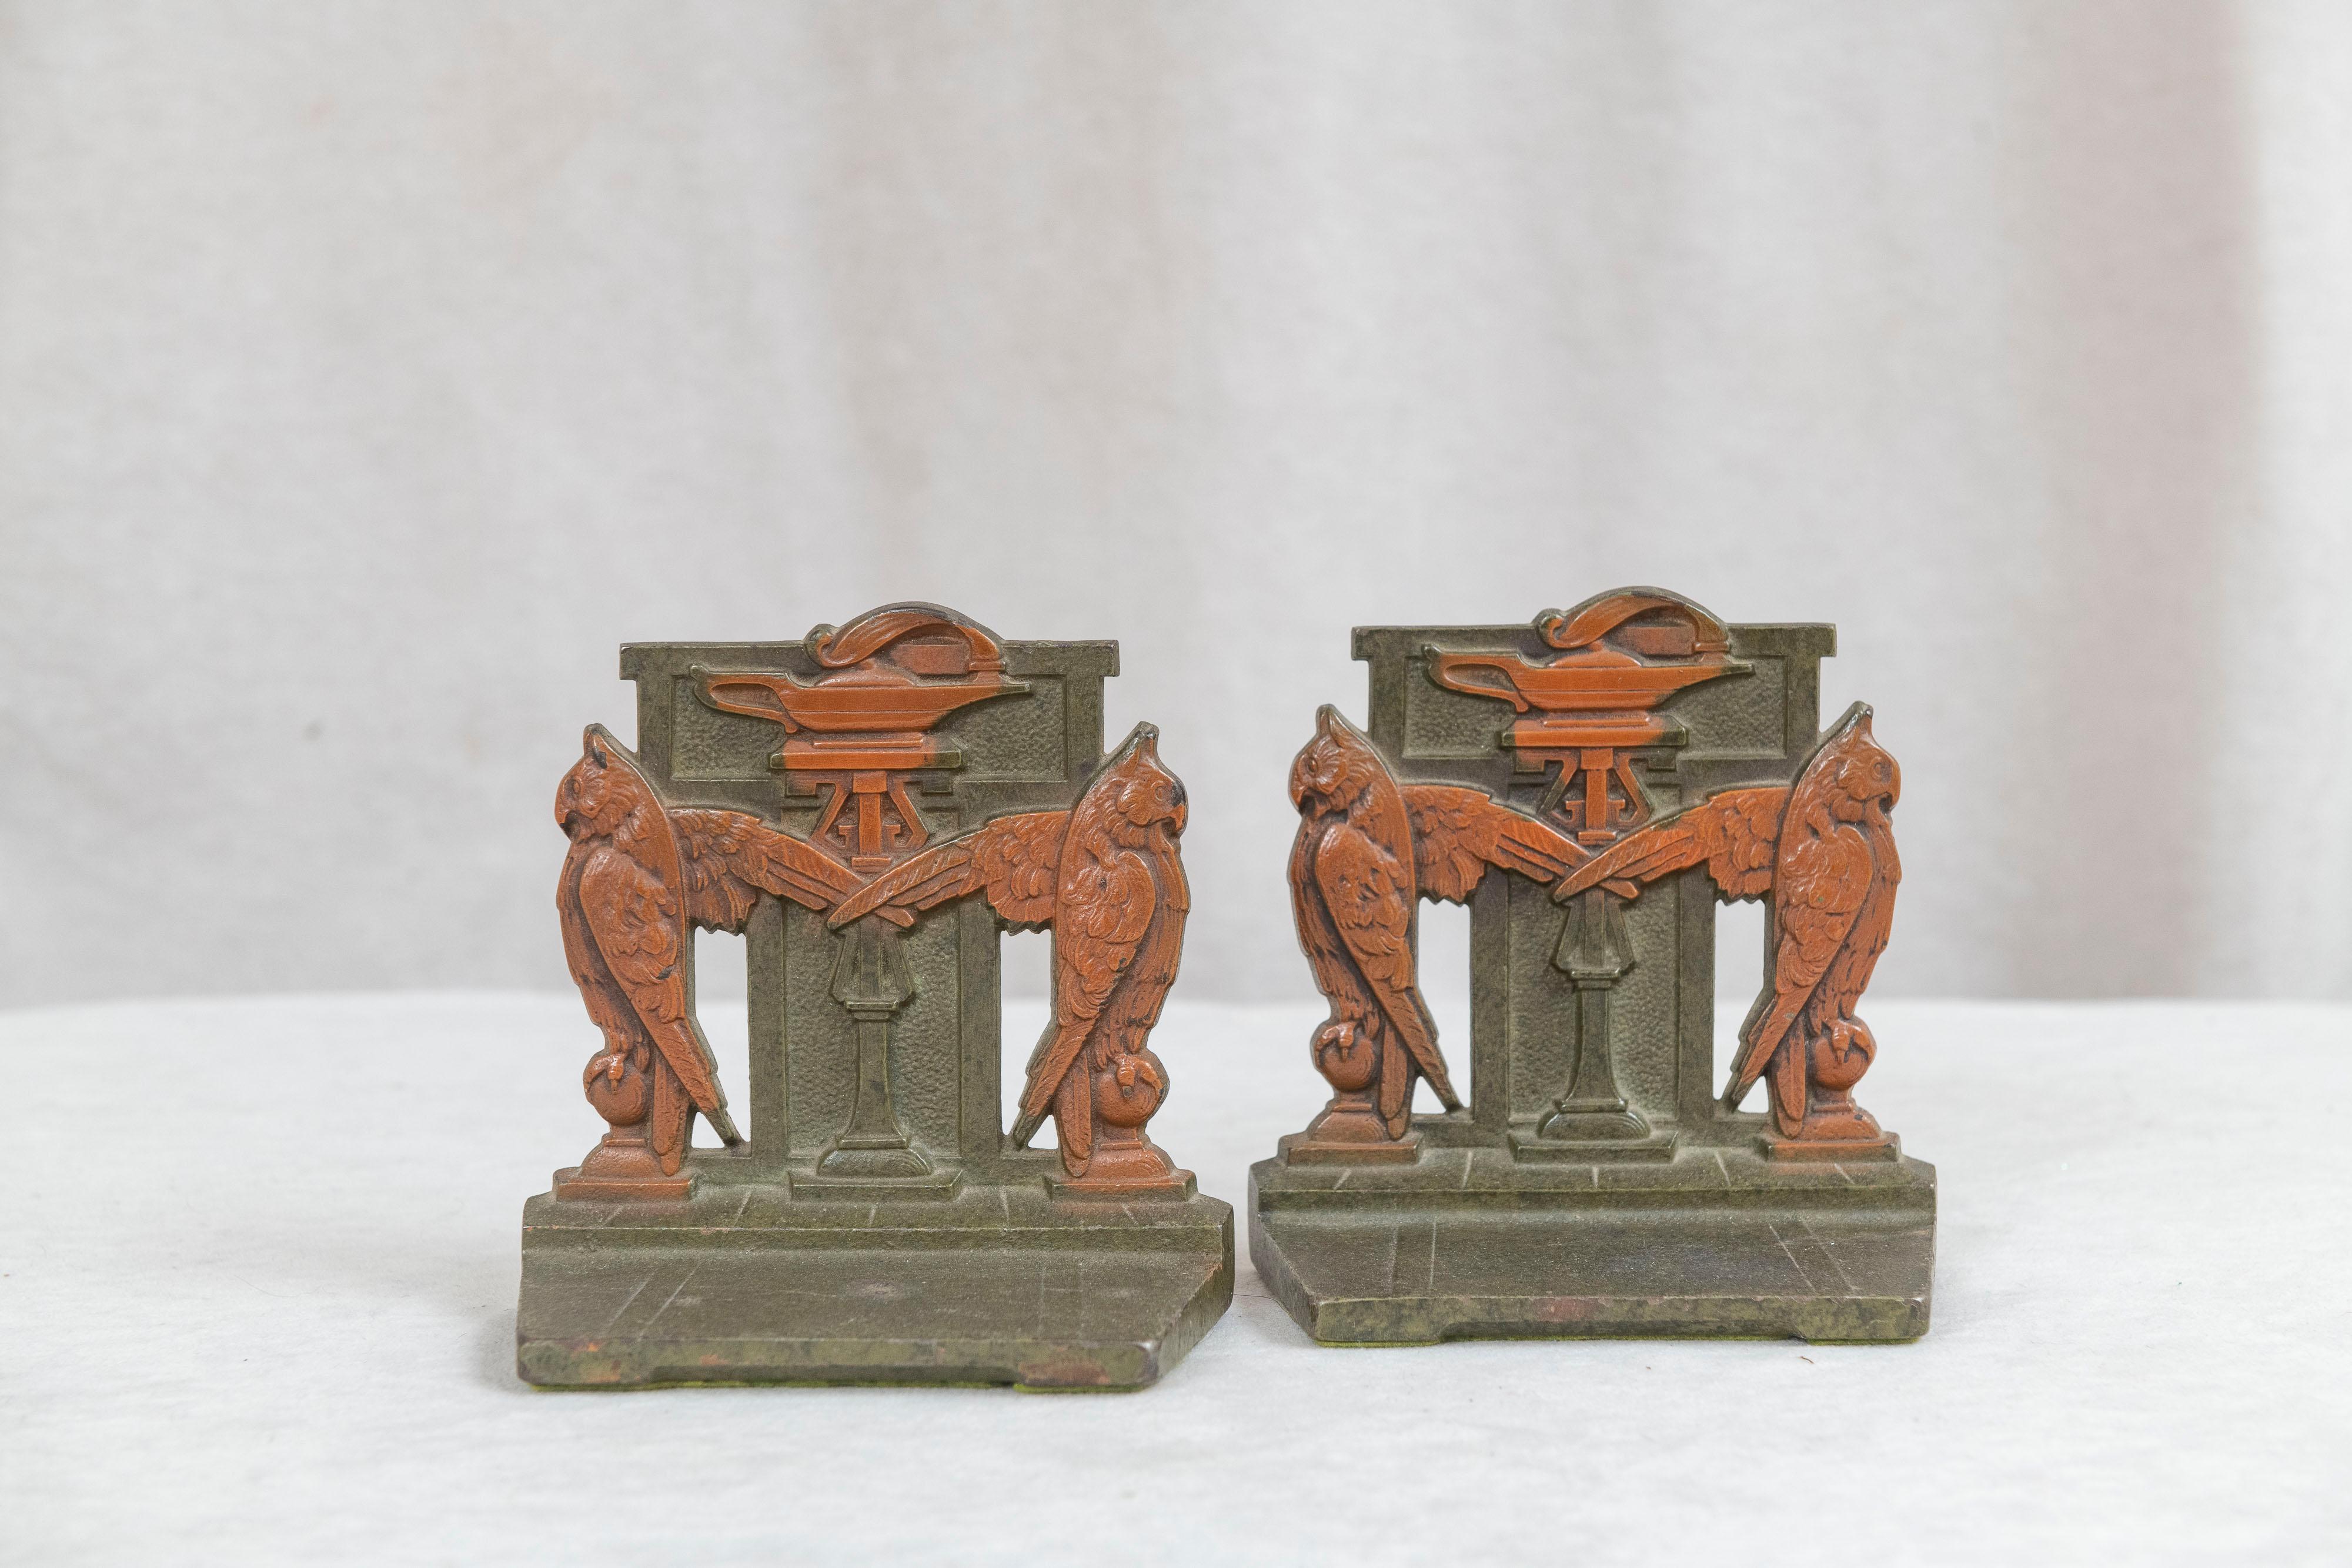 These bookends were made by the premier bookend company, Judd. They have that rich green and brown factory painted finish, and are finely cast as we have come to expect from this company. The art deco design with a pair of owls flanking a lamp with